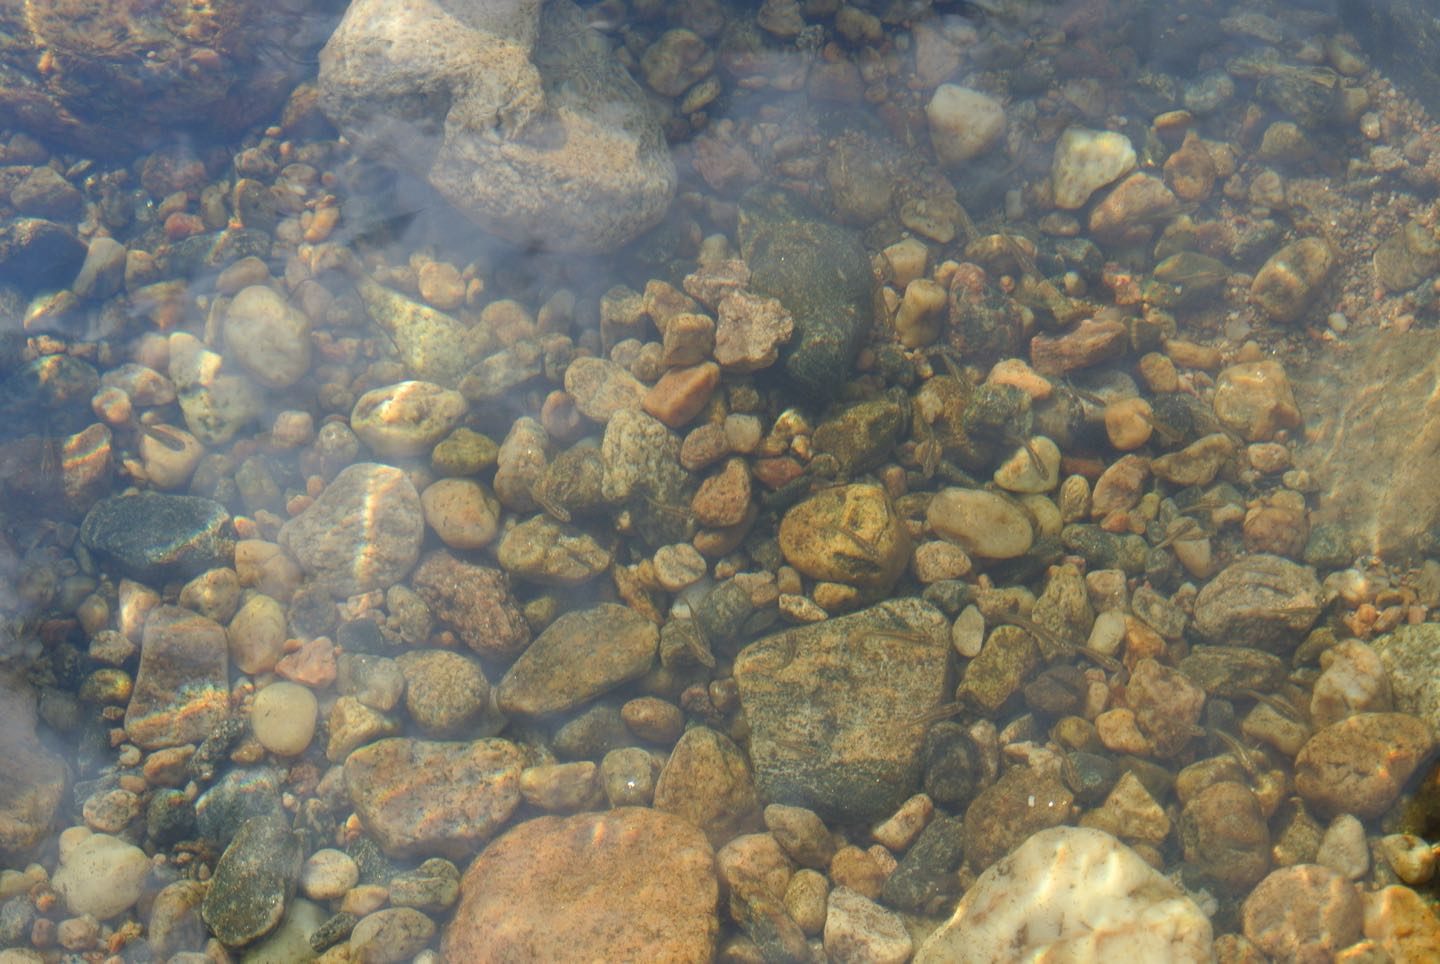 Cristal clear water and fish in Tres Piletas Rio Quilpo, San Marcos Sierra.